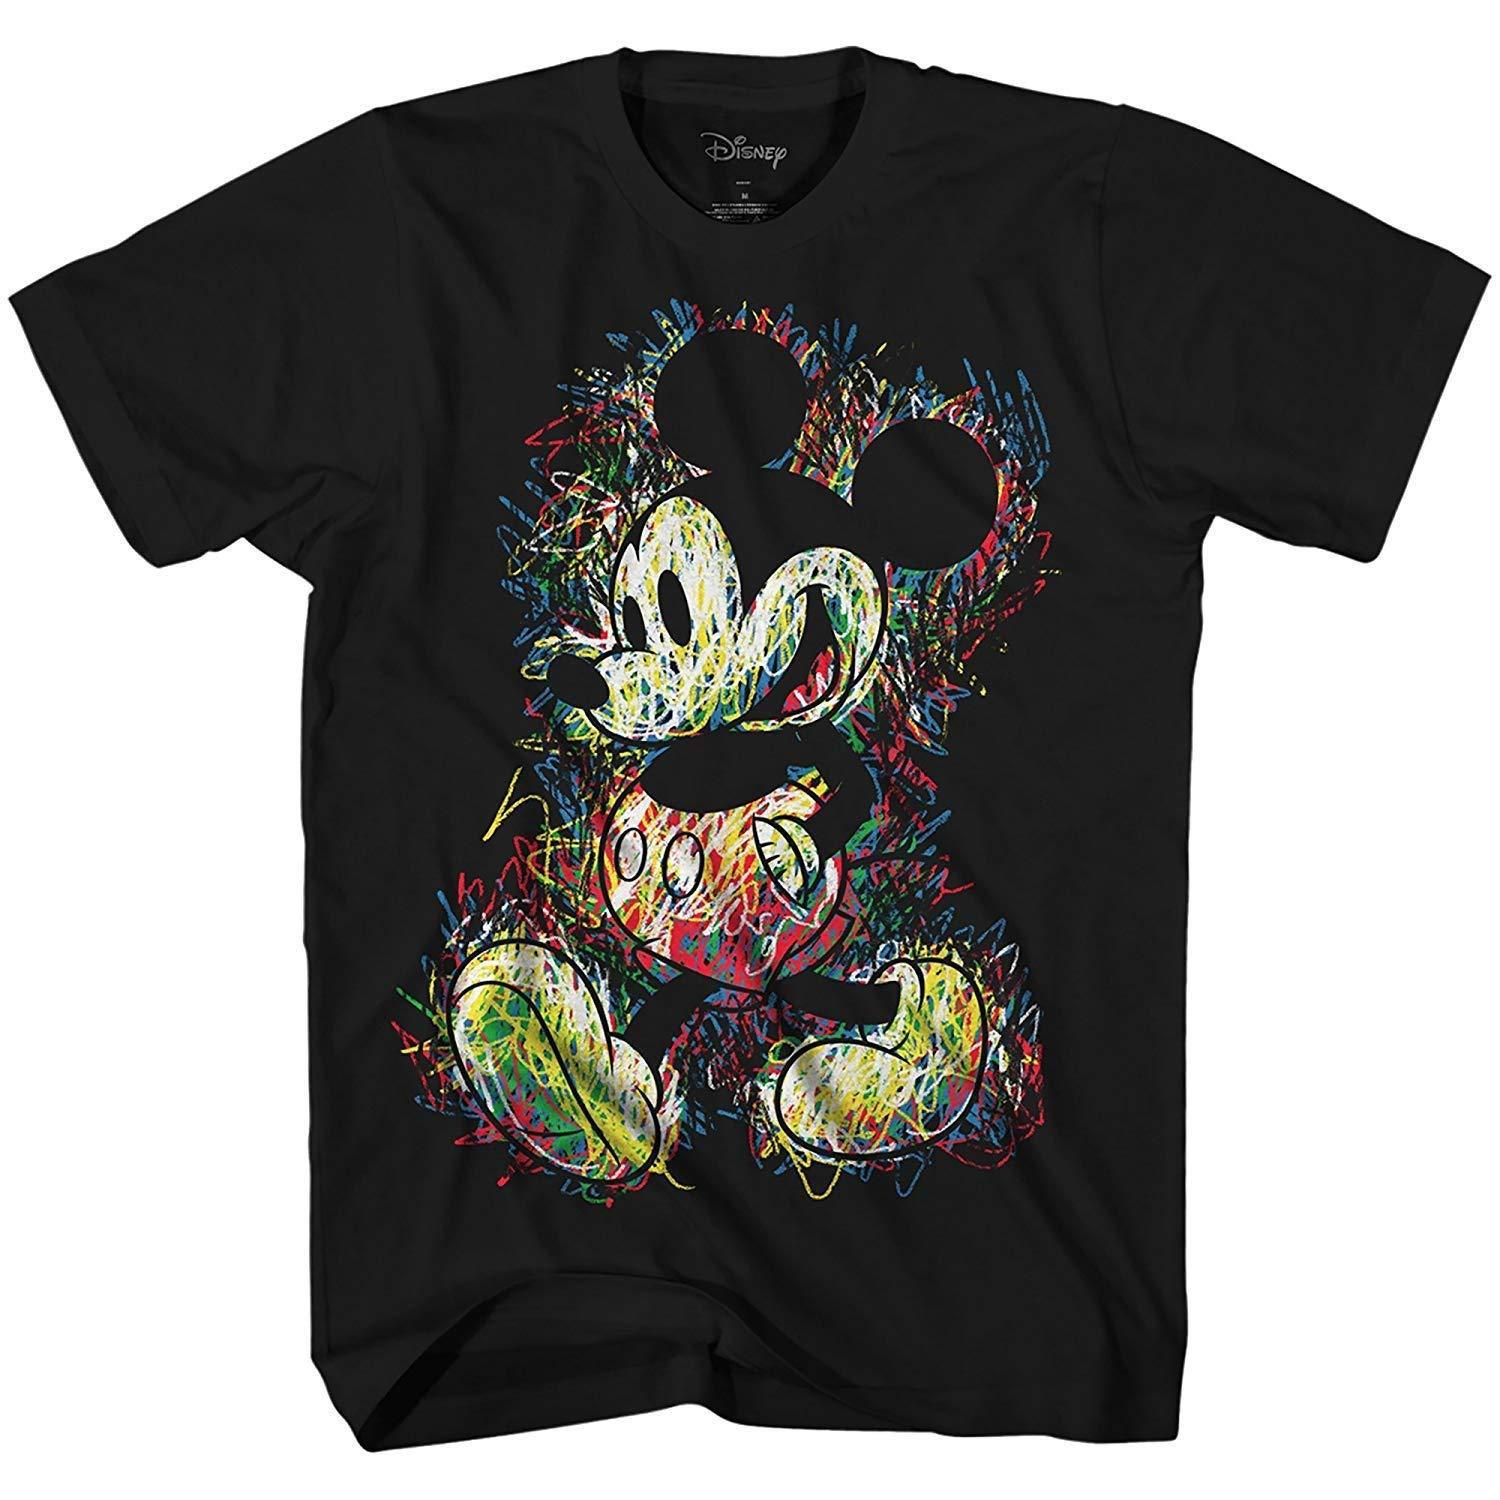 Disney Mickey Mouse Scribbles Disneyland Adult Mens Graphic T-Shirt (Large) - image 1 of 1